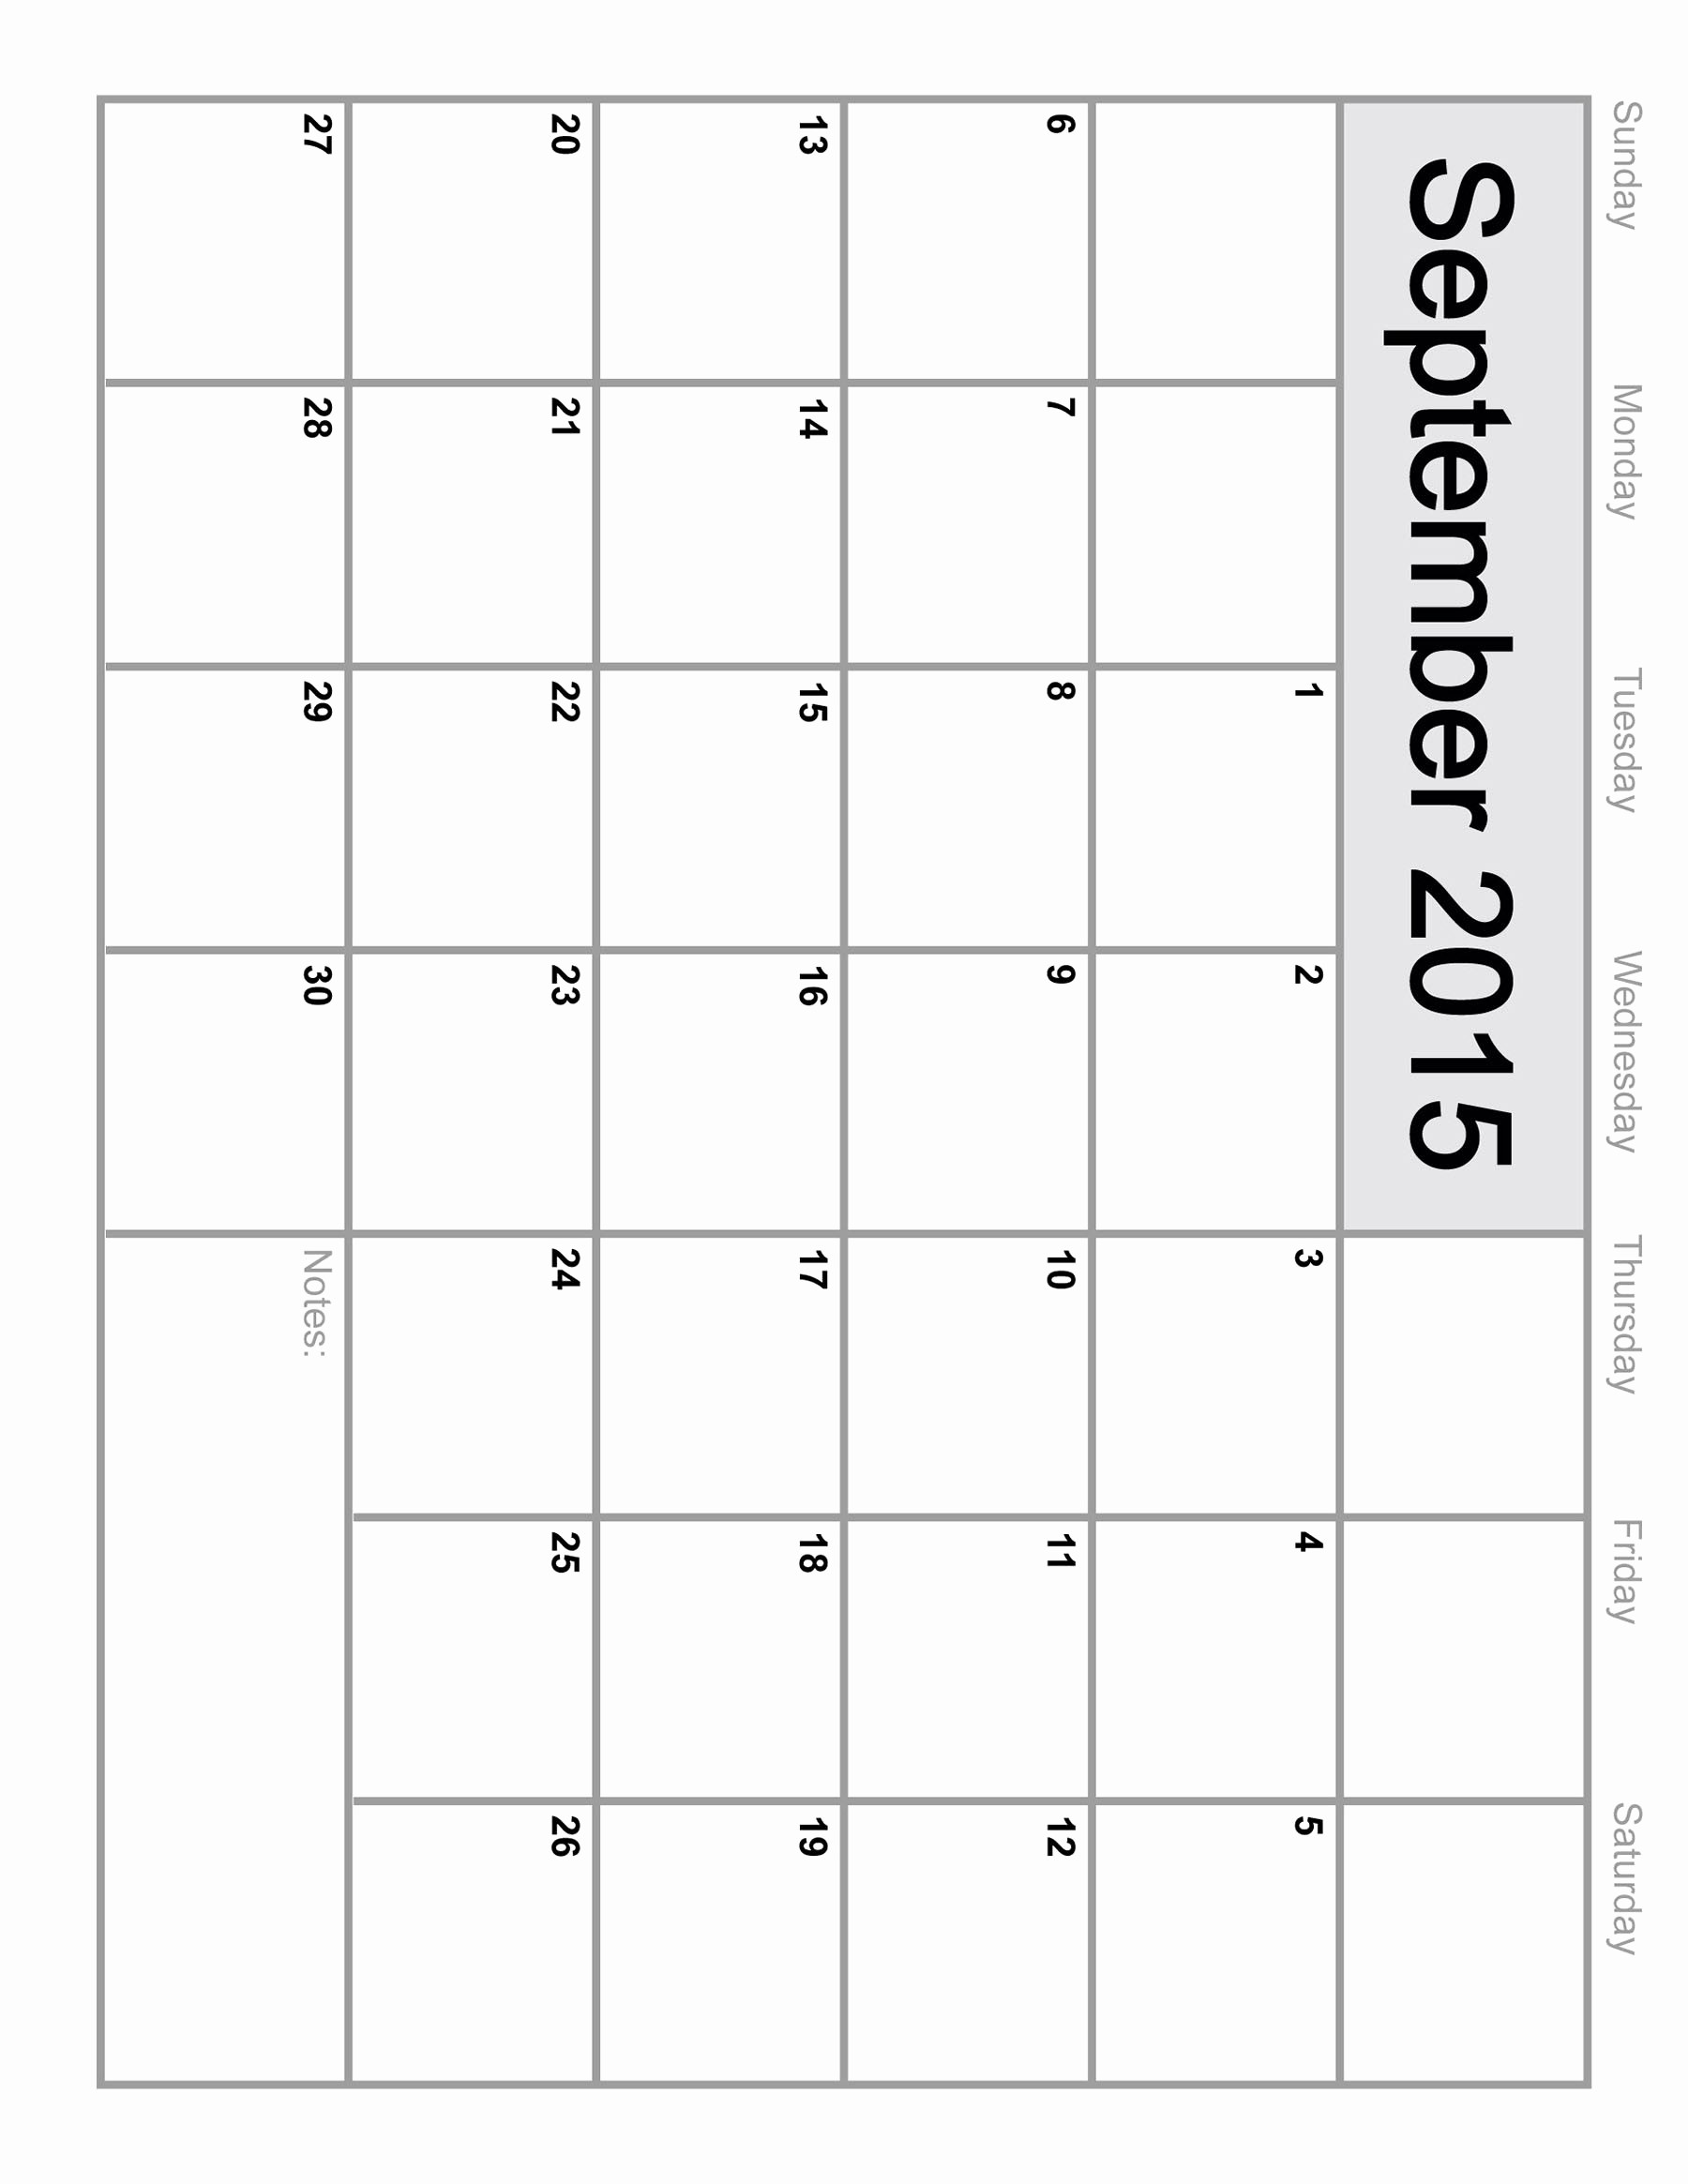 Free Monthly Calendar Templates 2015 New Monthly Calendar Templates 2015 – 2017 Printable Calendar